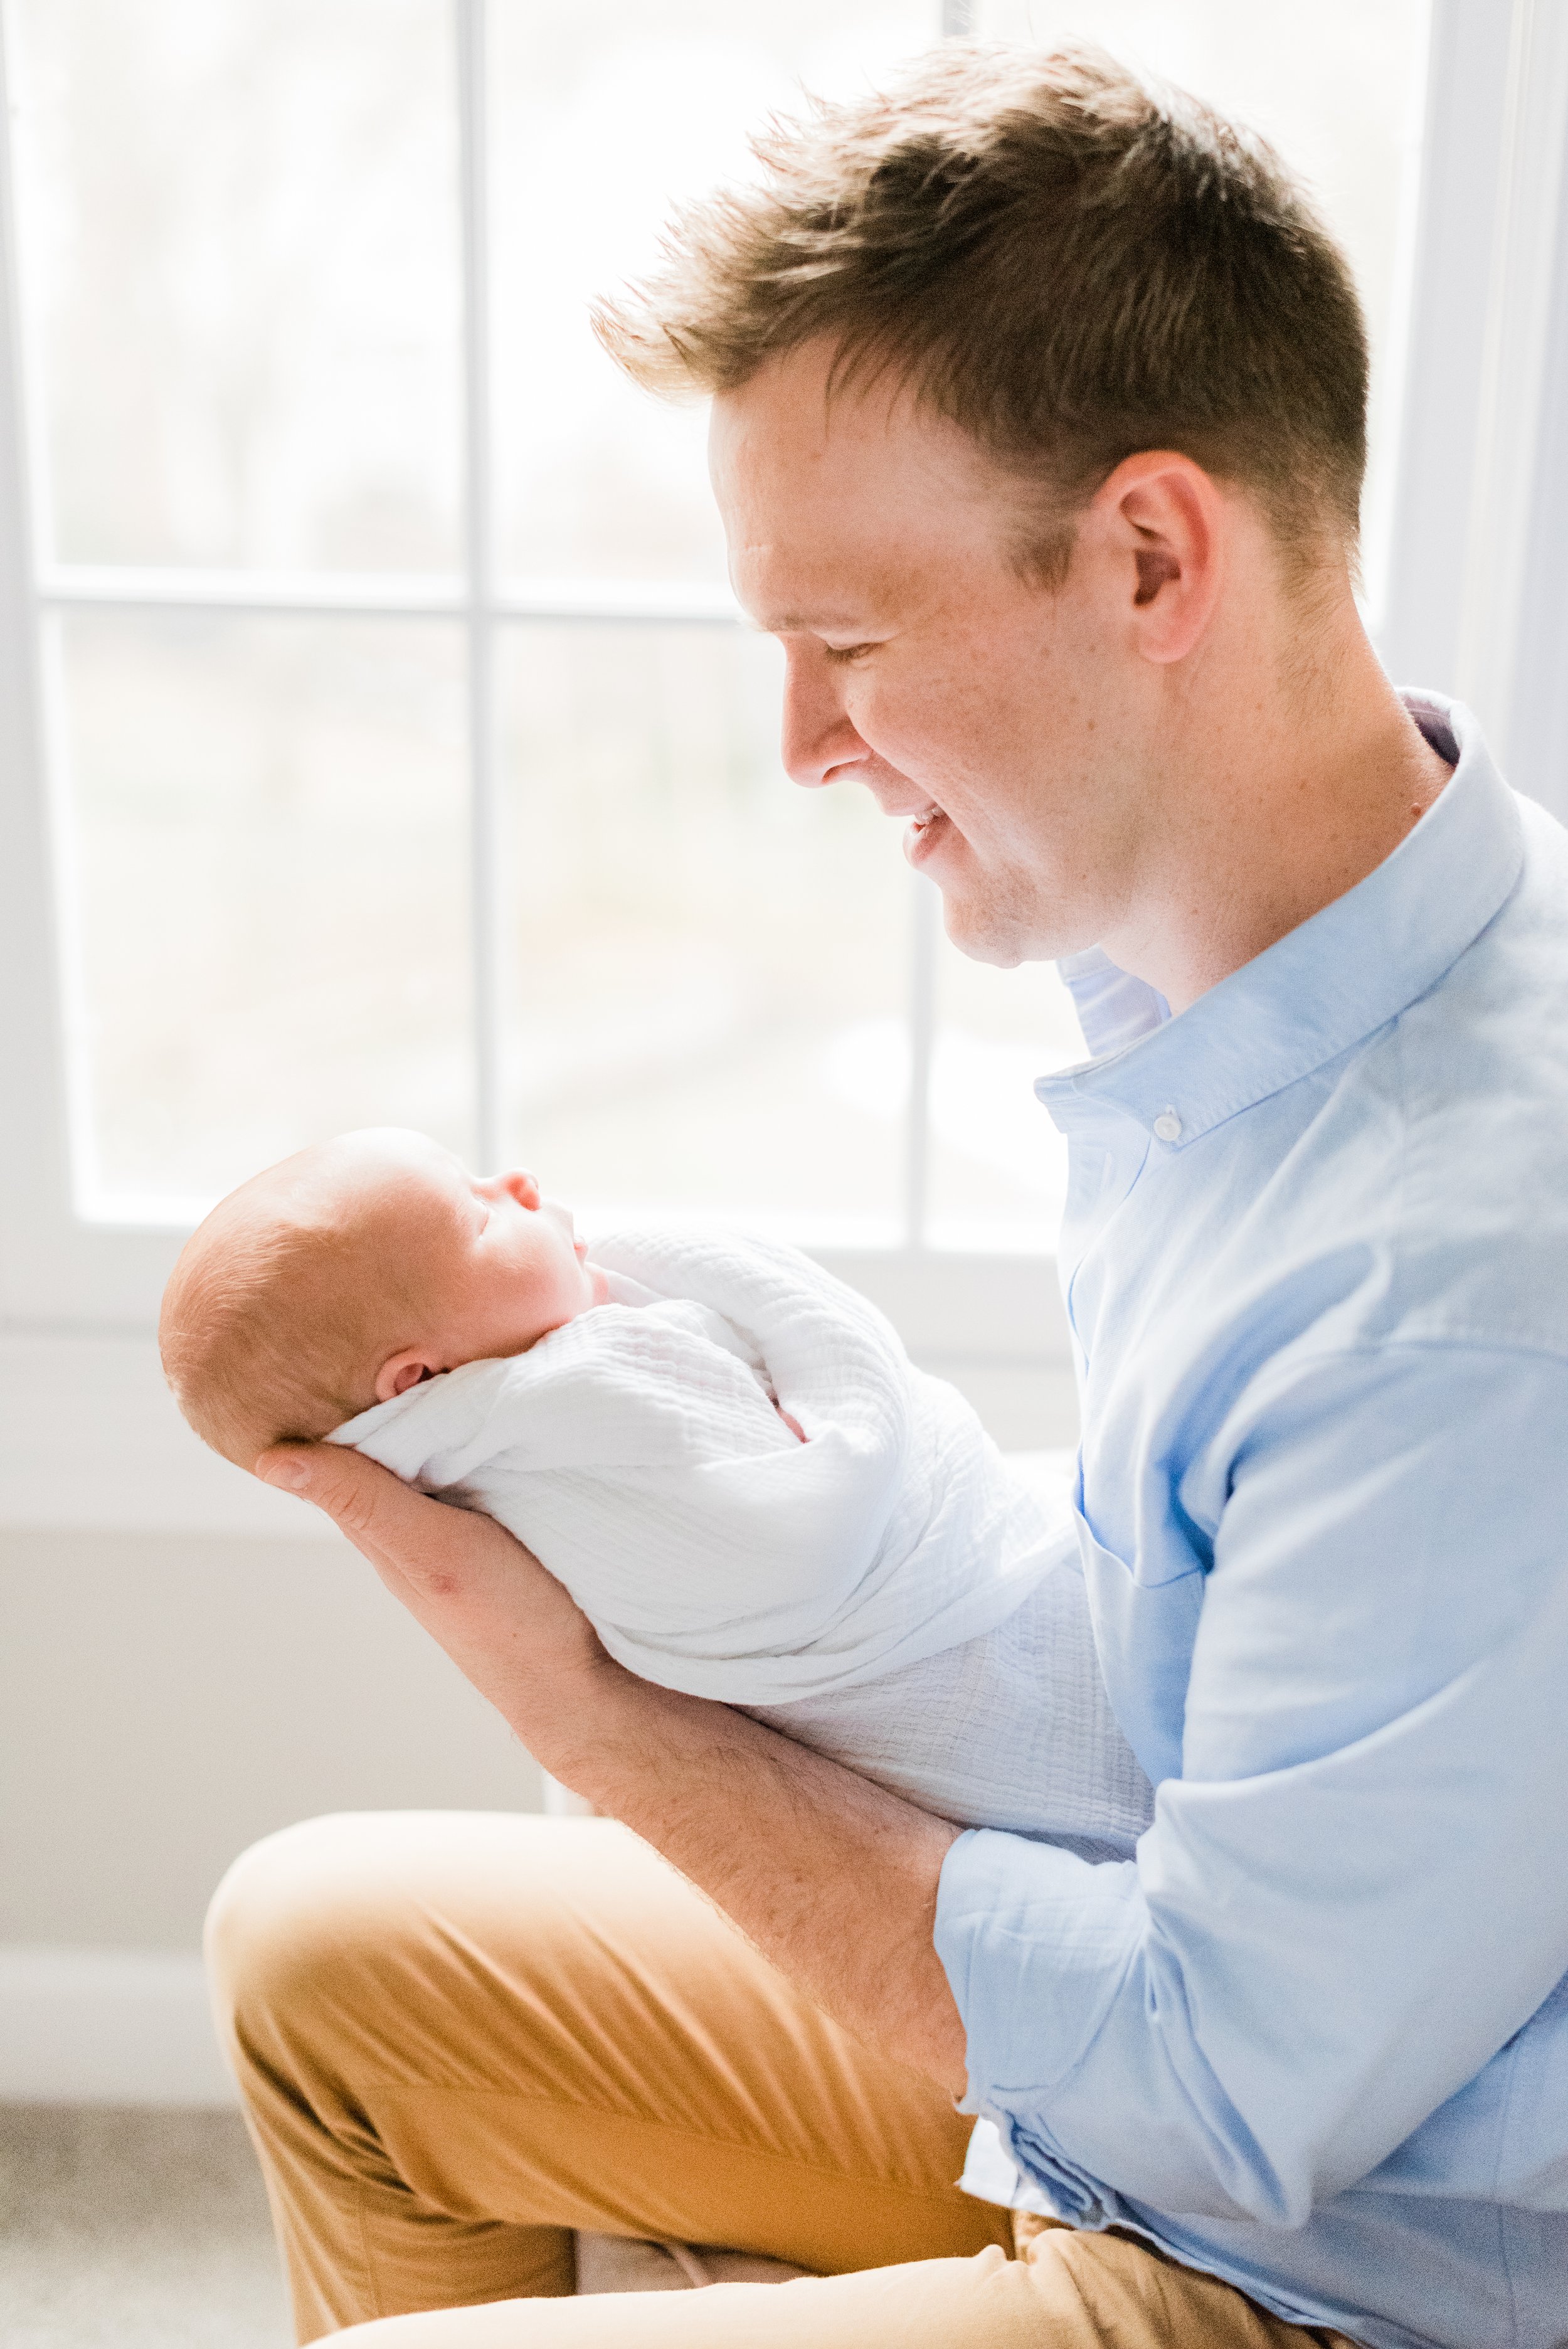  A new father looks lovingly at his new baby in his hands in a personalized photo captured by Jacquie Erickson, an Atlanta-based photographer. New parent photo personalized photoshoot #atlantafamilyphotographer #familiesofinstagram #AtlantaPortraits 